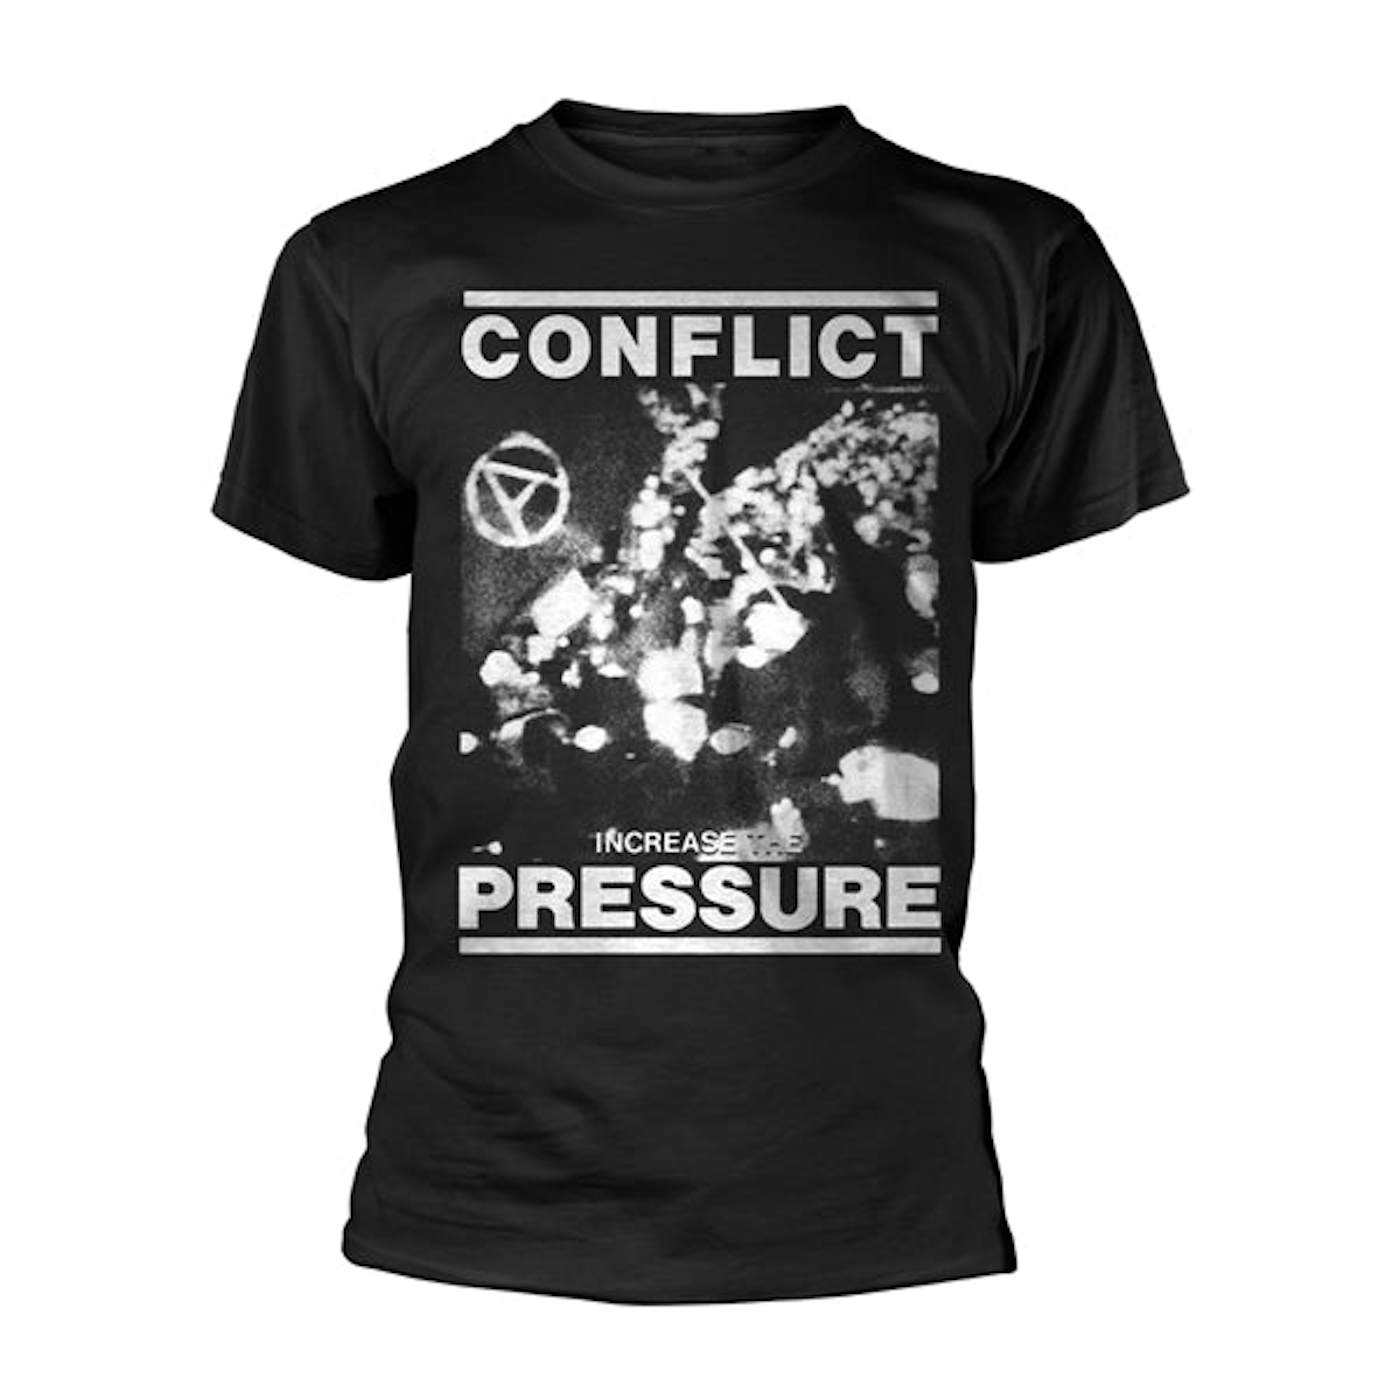 Conflict T Shirt - Increase The Pressure (Black)